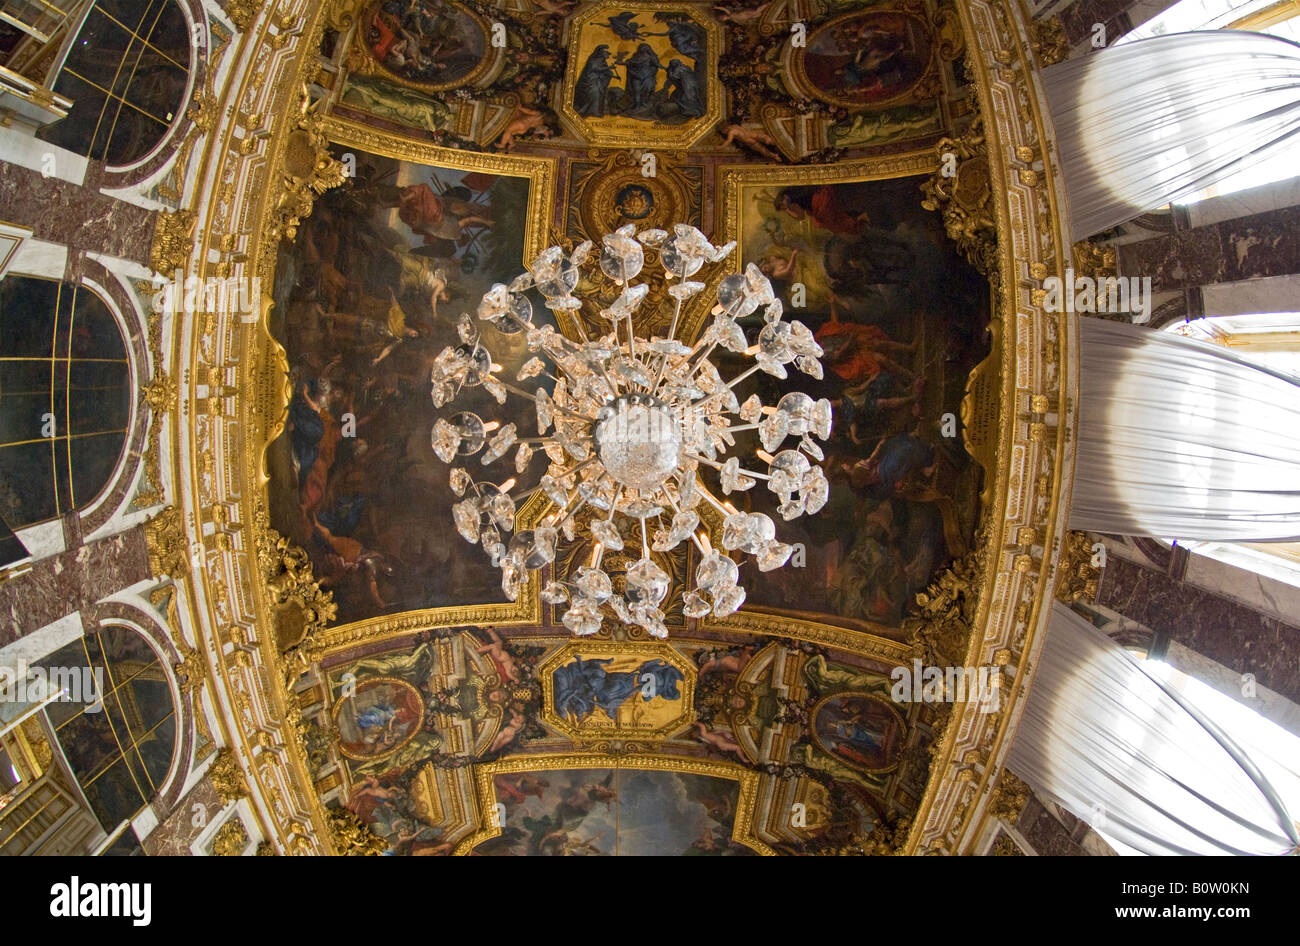 Wide Angle View Of The Ceiling And Chandelier In The Hall Of